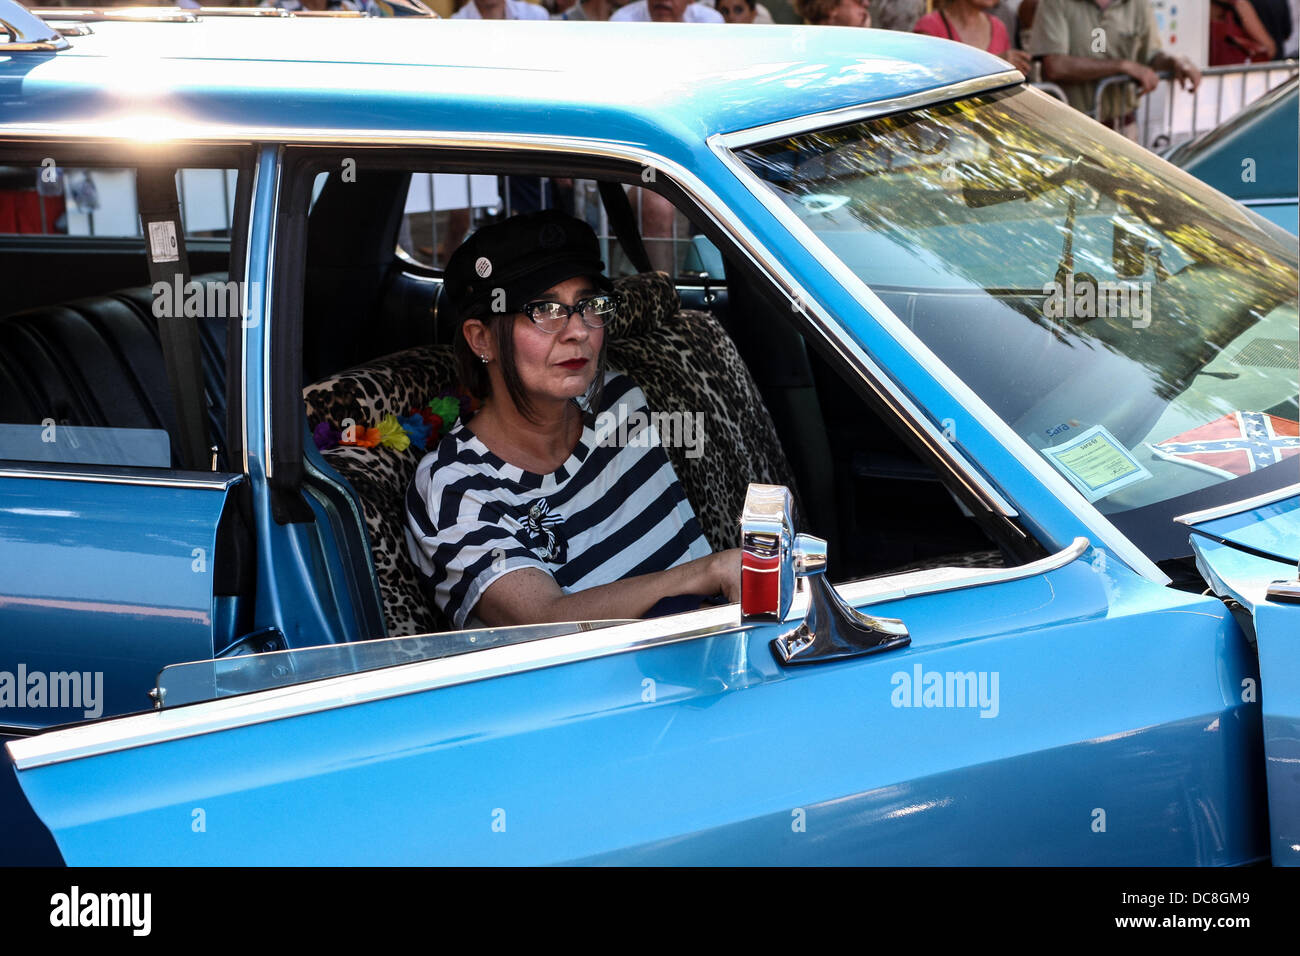 Senigallia, Italy. 10th August, 2013. Summer Jamboree 6th day  [International Festival 60's revival Rock & Roll] OLD USA Car parade in Senigallia, Italy on Aug 10, 2013. Credit:  Valerio Agolino/Alamy Live News Stock Photo